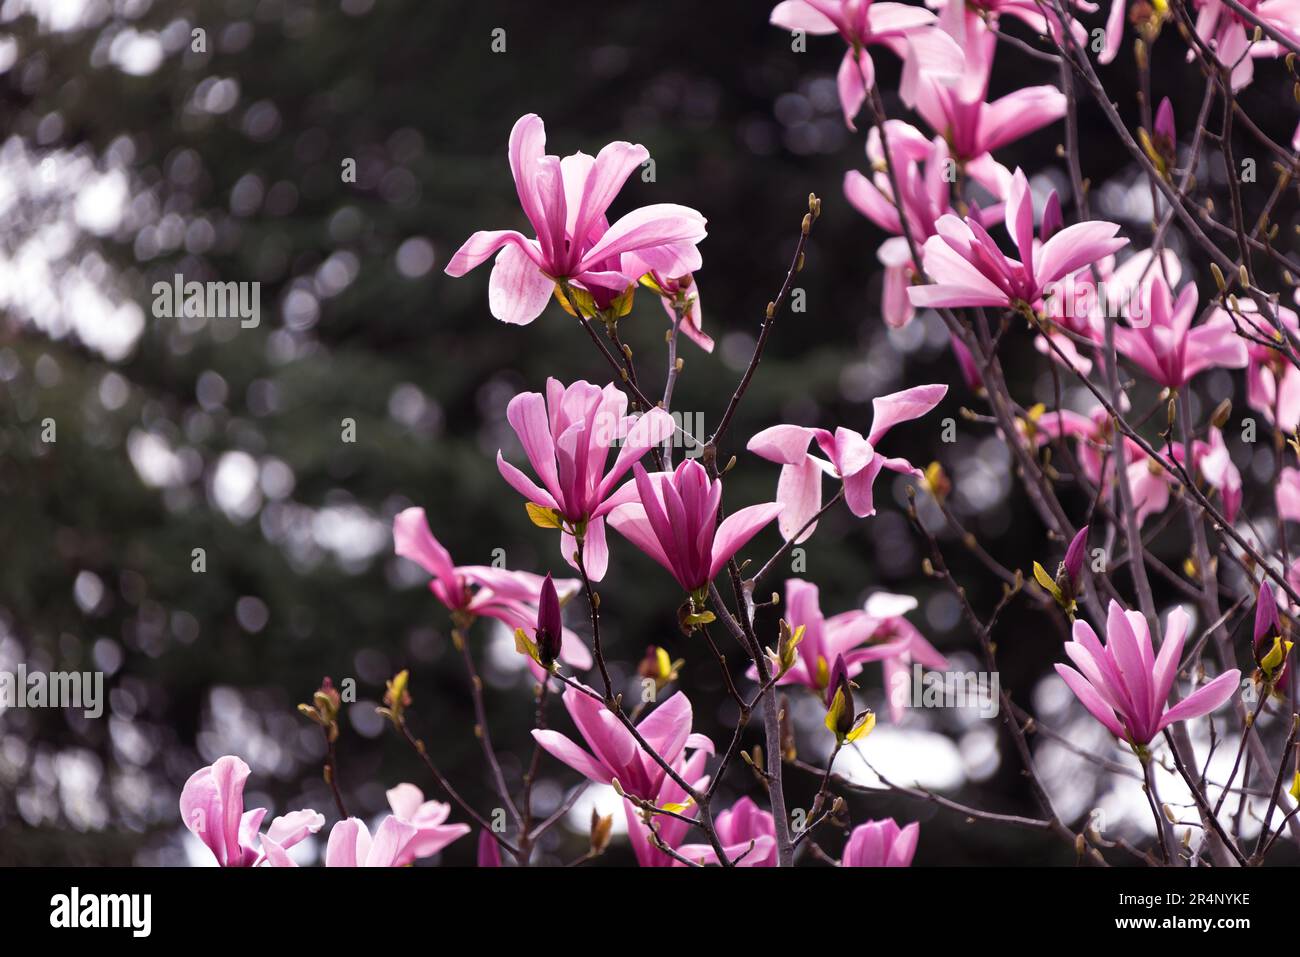 Pink magnolia liliflora flowers. Woody orchid tree in full bloom. Magnolia blooms in spring. Delicate pink magnolia flowers bloom in spring. Spring fl Stock Photo